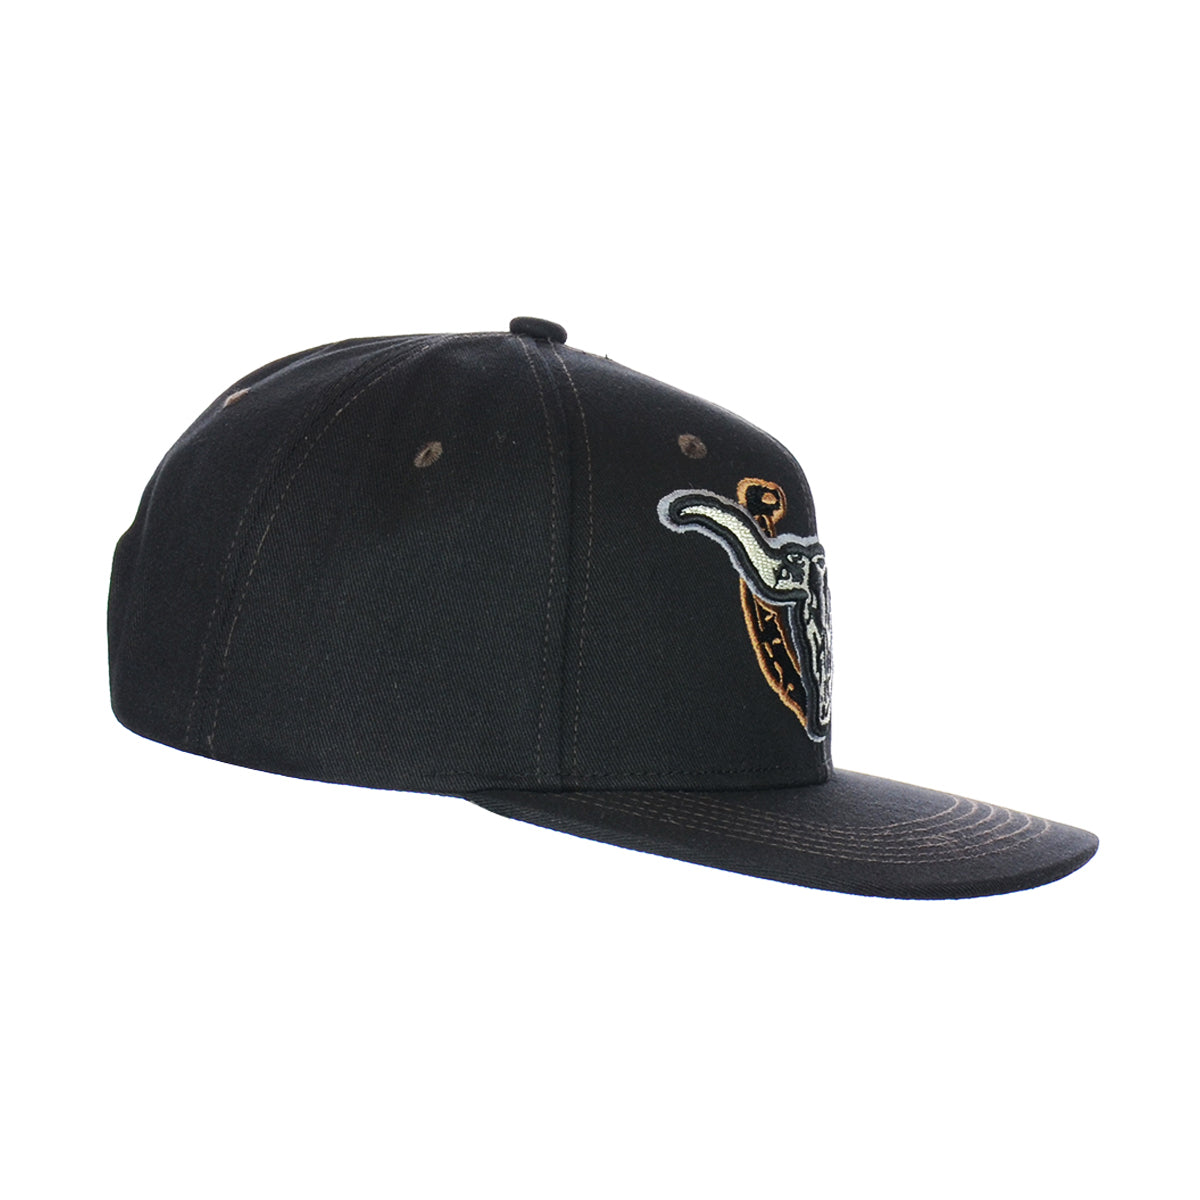 Snapback "WILD BULL" Hat Embroidered